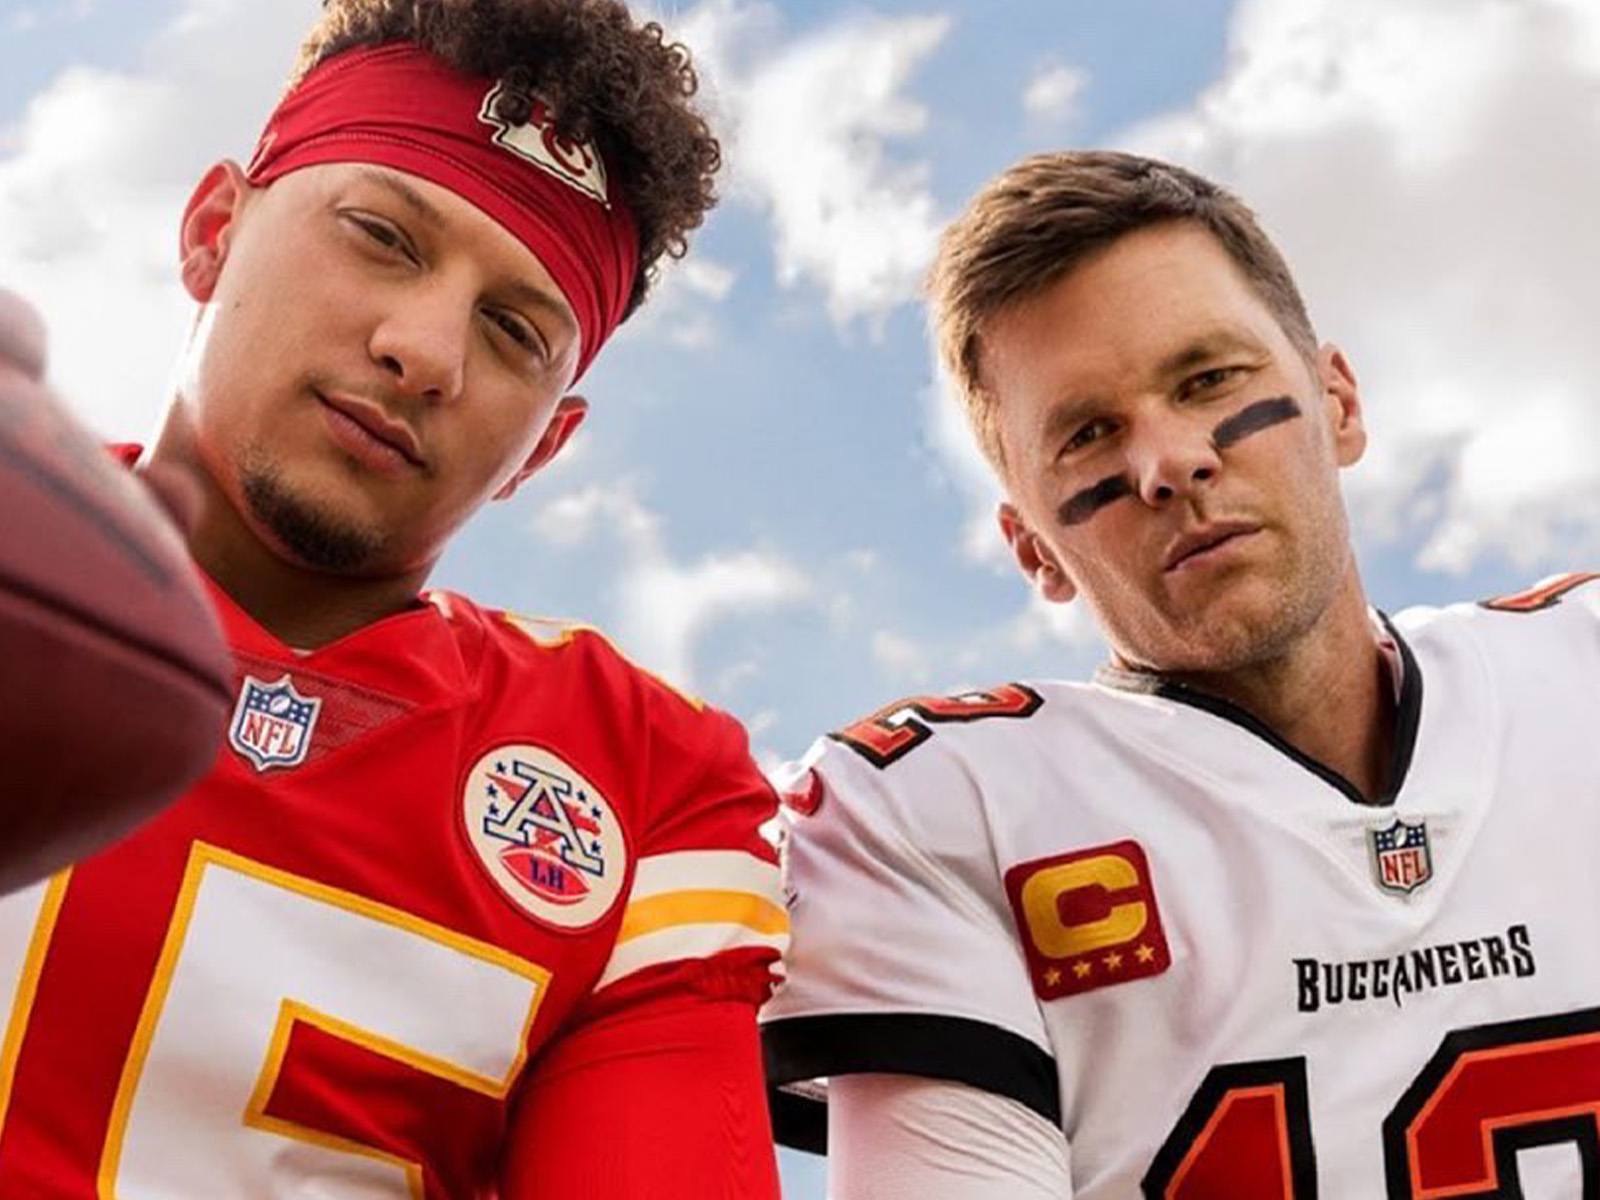 Madden 22 Cover Features Super Bowl Favorites Mahomes, Brady